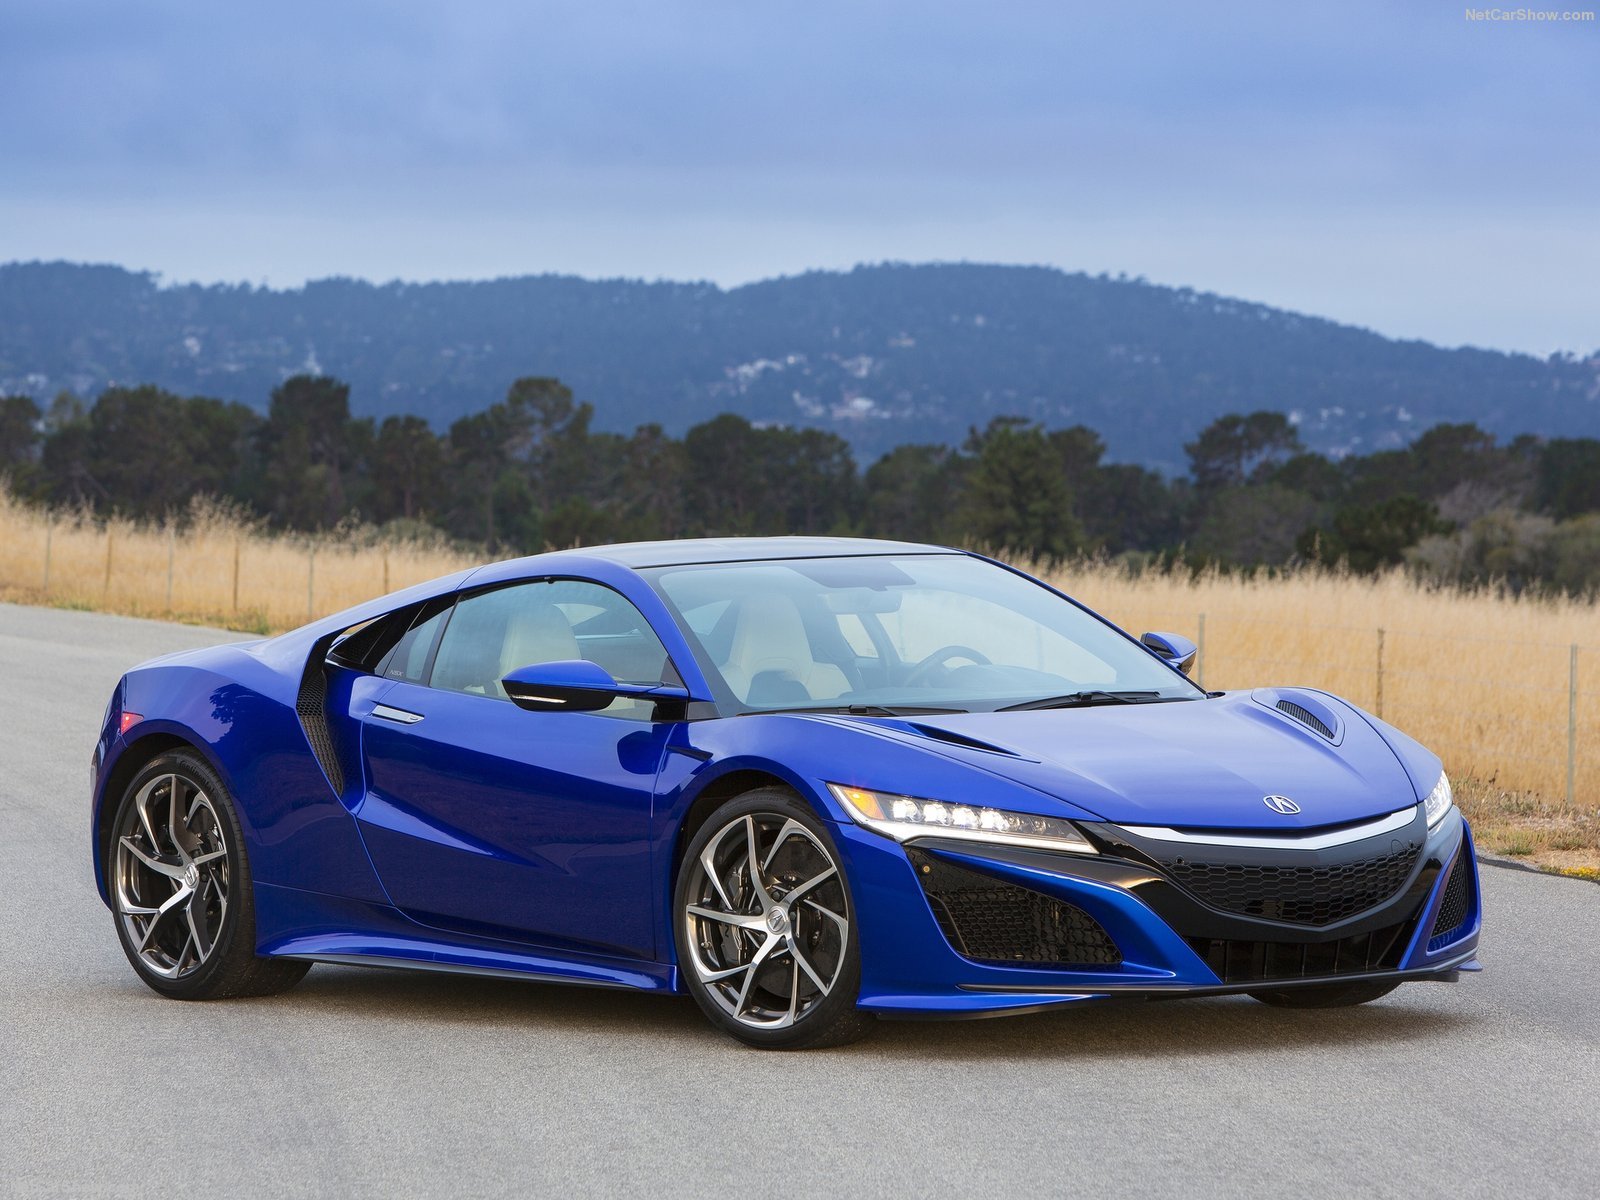 2016, Acura, Cars, Coupe, Nsx, Supercars Wallpaper